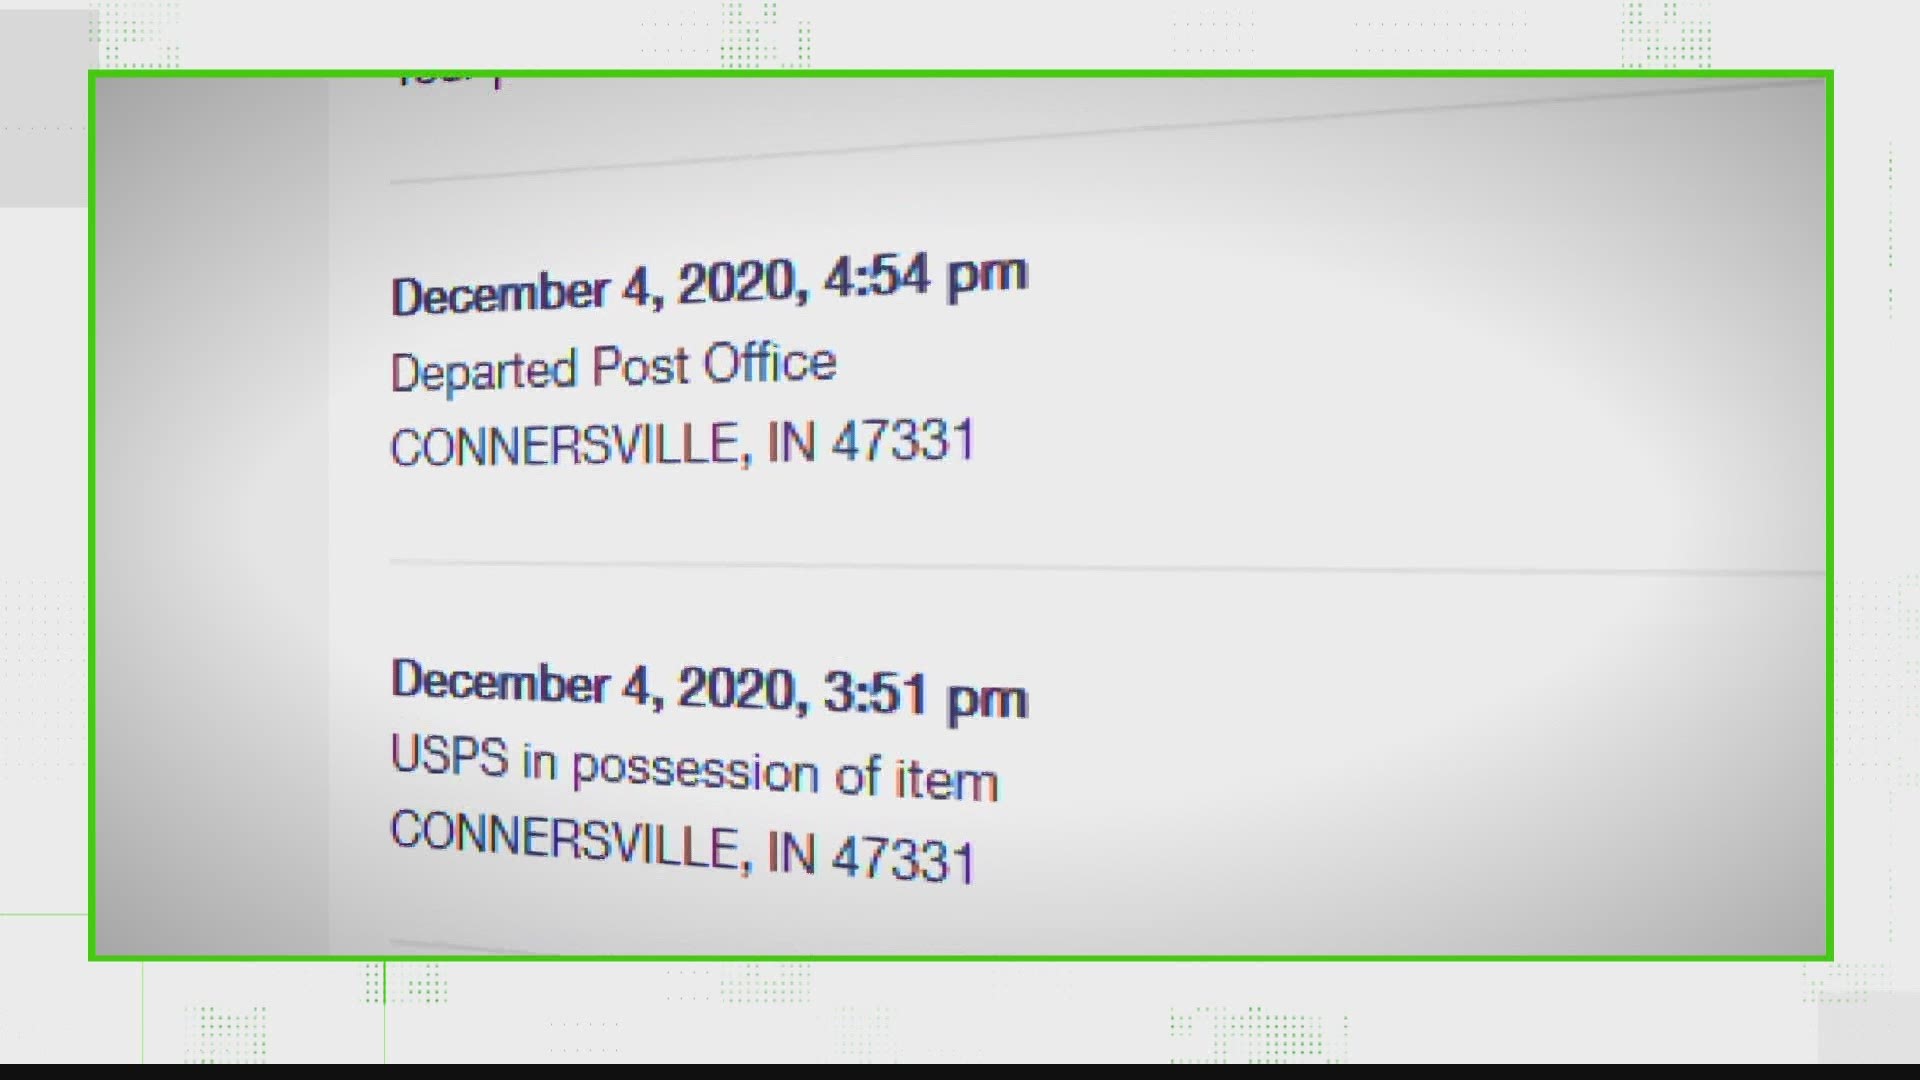 13News viewers want to know if the Indianapolis postal facility is experiencing a big back-up of holiday packages.